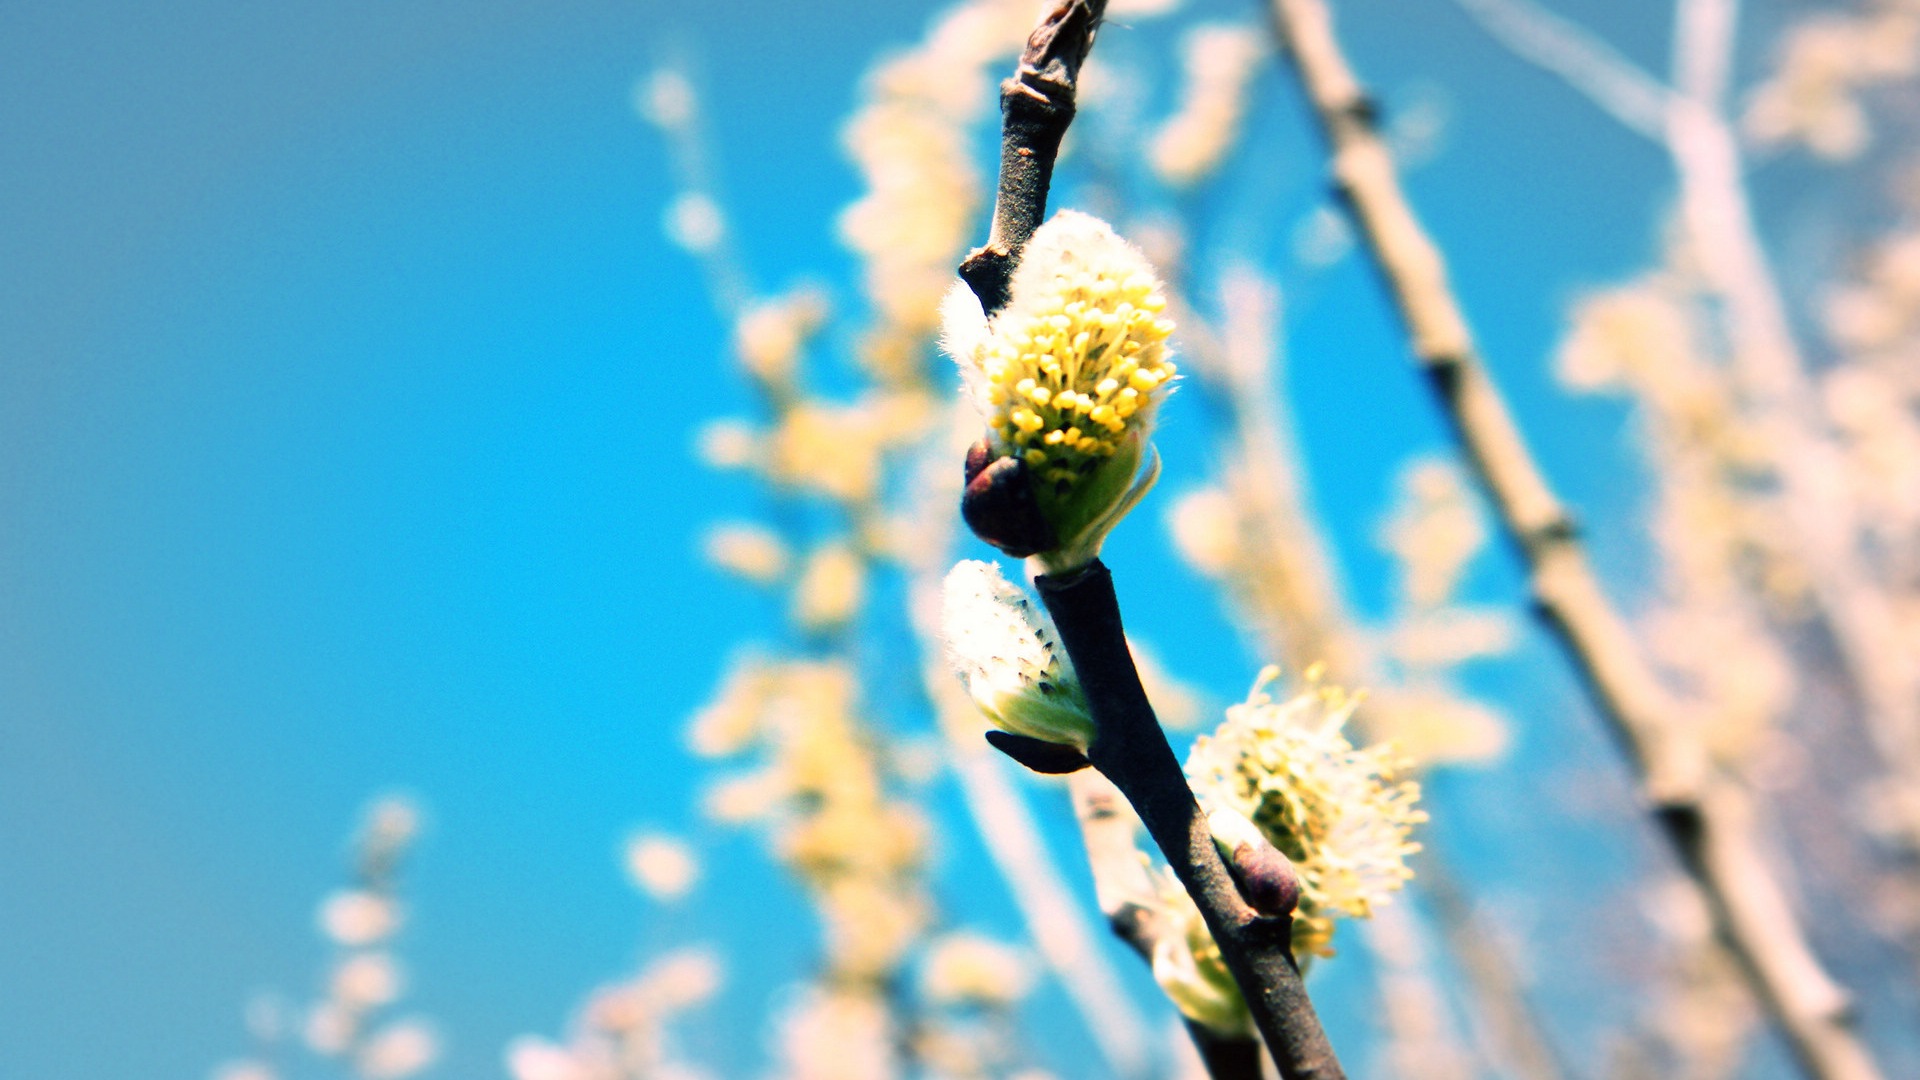 Spring buds on the trees HD wallpapers #12 - 1920x1080